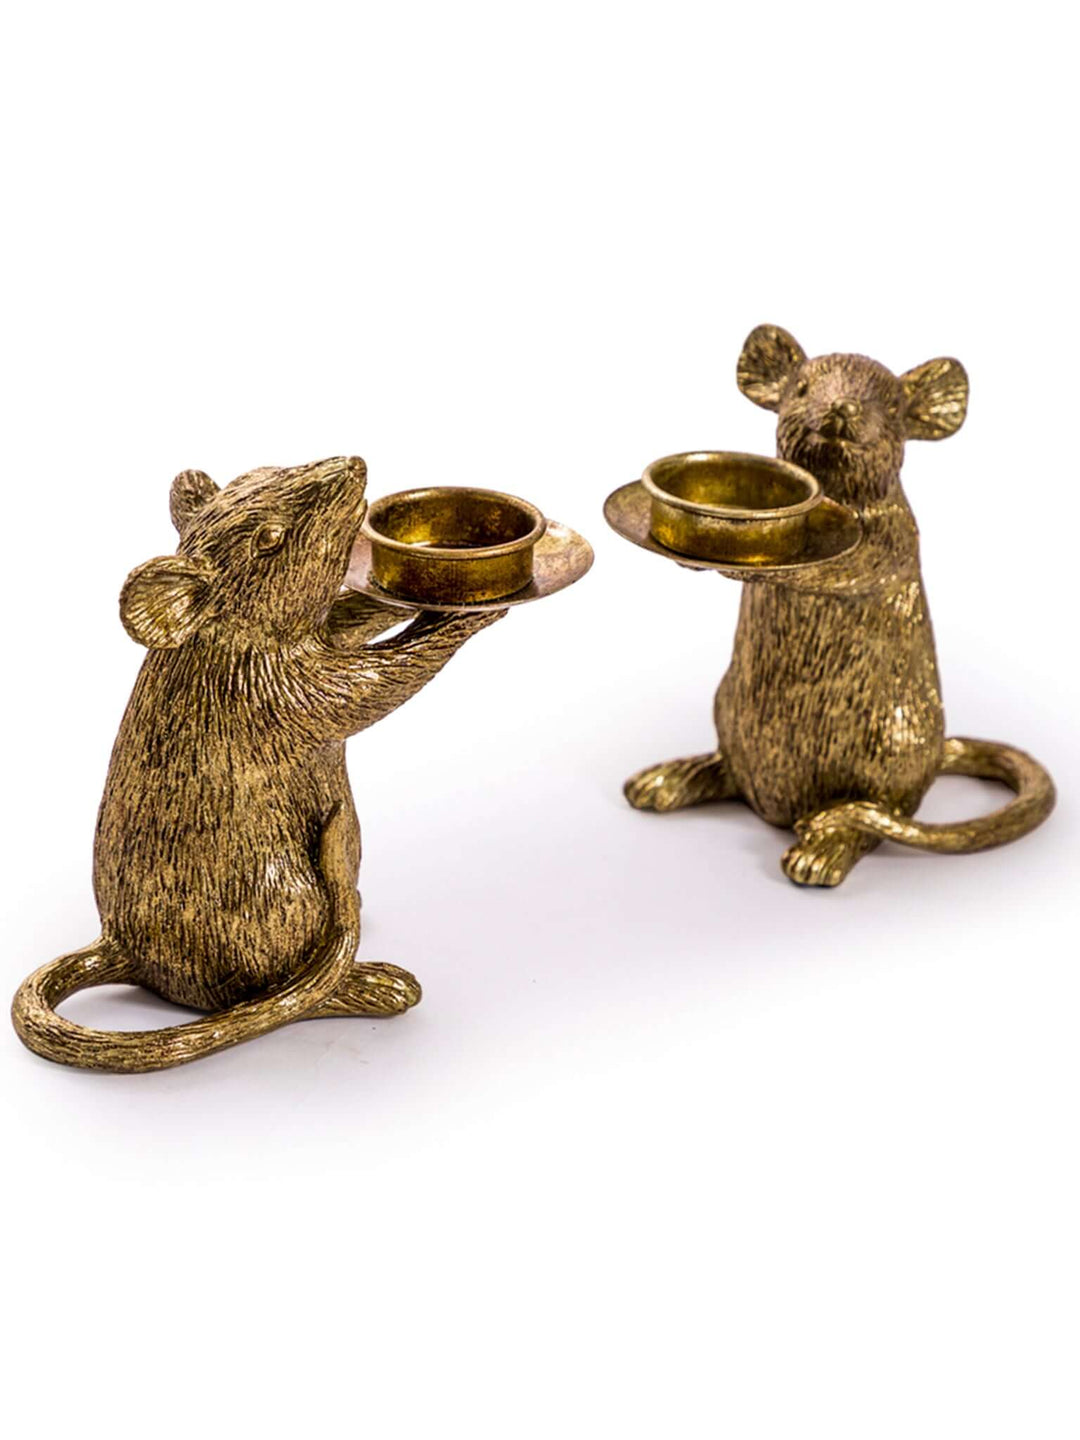 Pair of gold mouse candle holders, Large Mice Tea Light holders